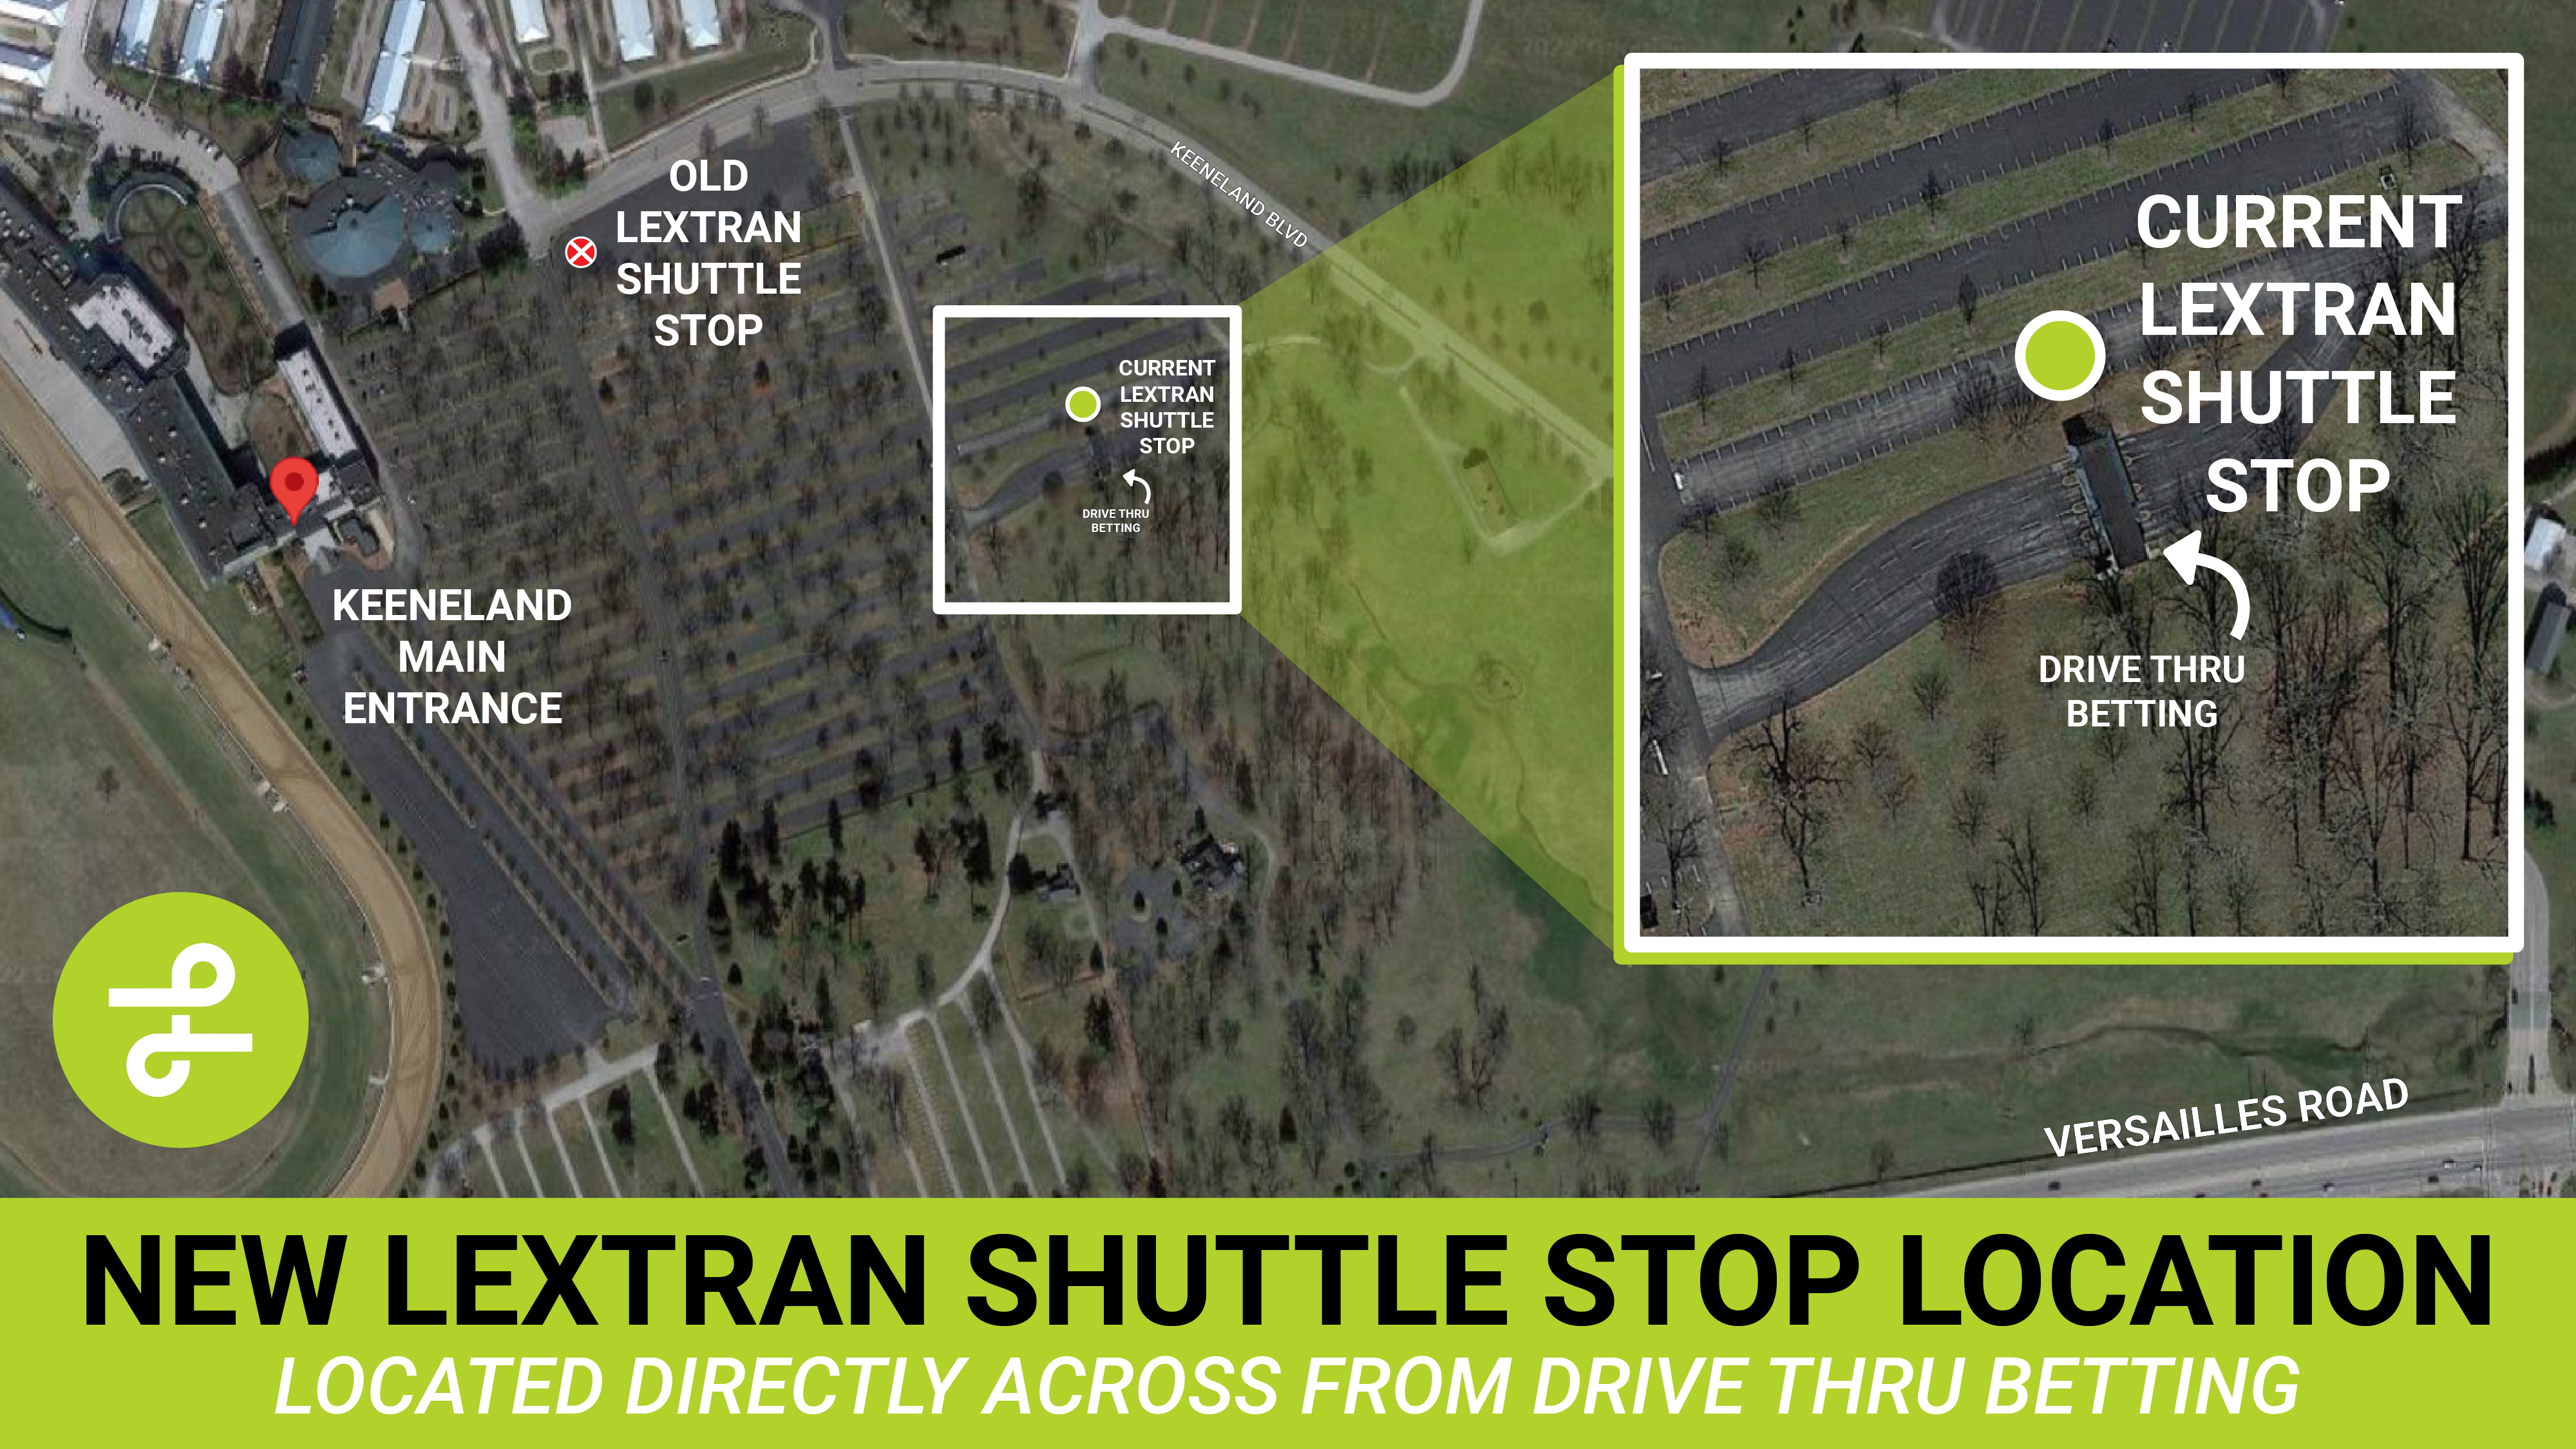 The new Lextran Shuttle Bus stop is located directly across from the drive thru betting station.